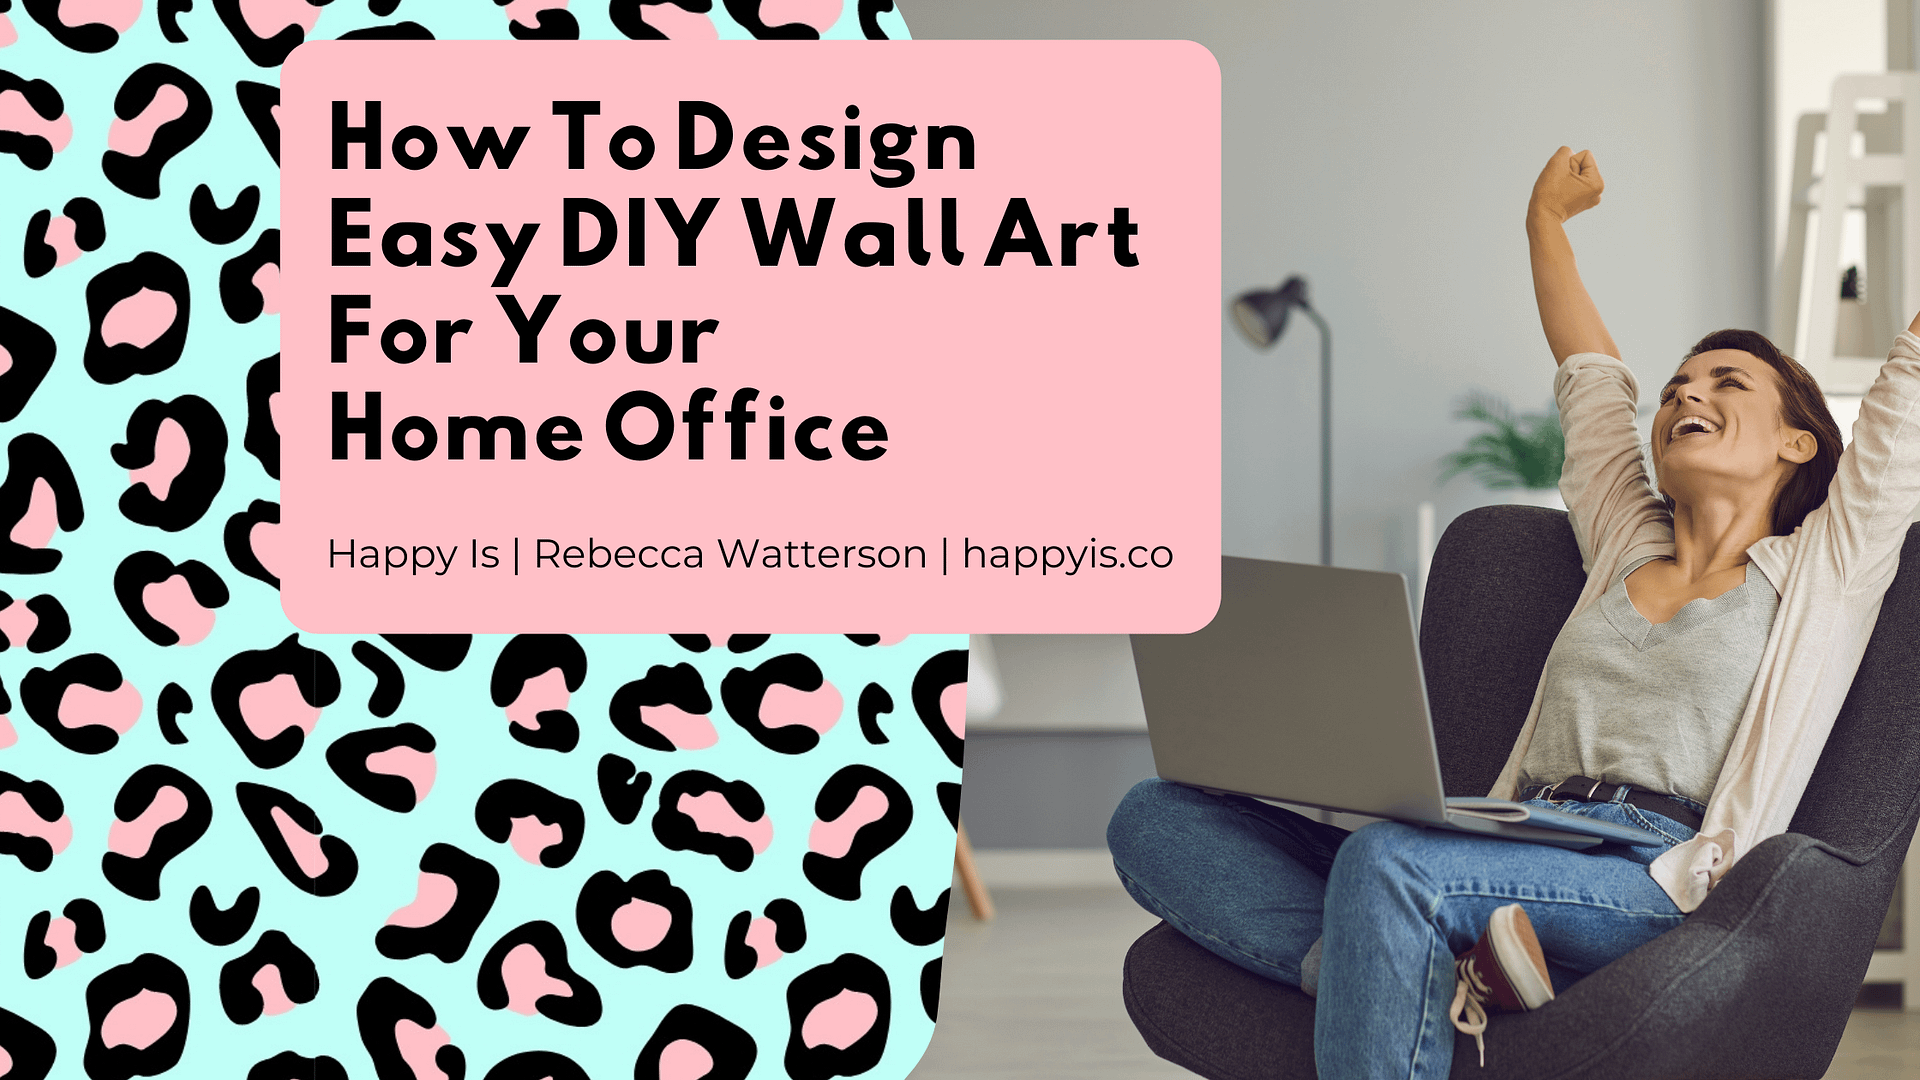 How To Design Easy DIY Wall Art For Your Home Office in 15 Minutes!